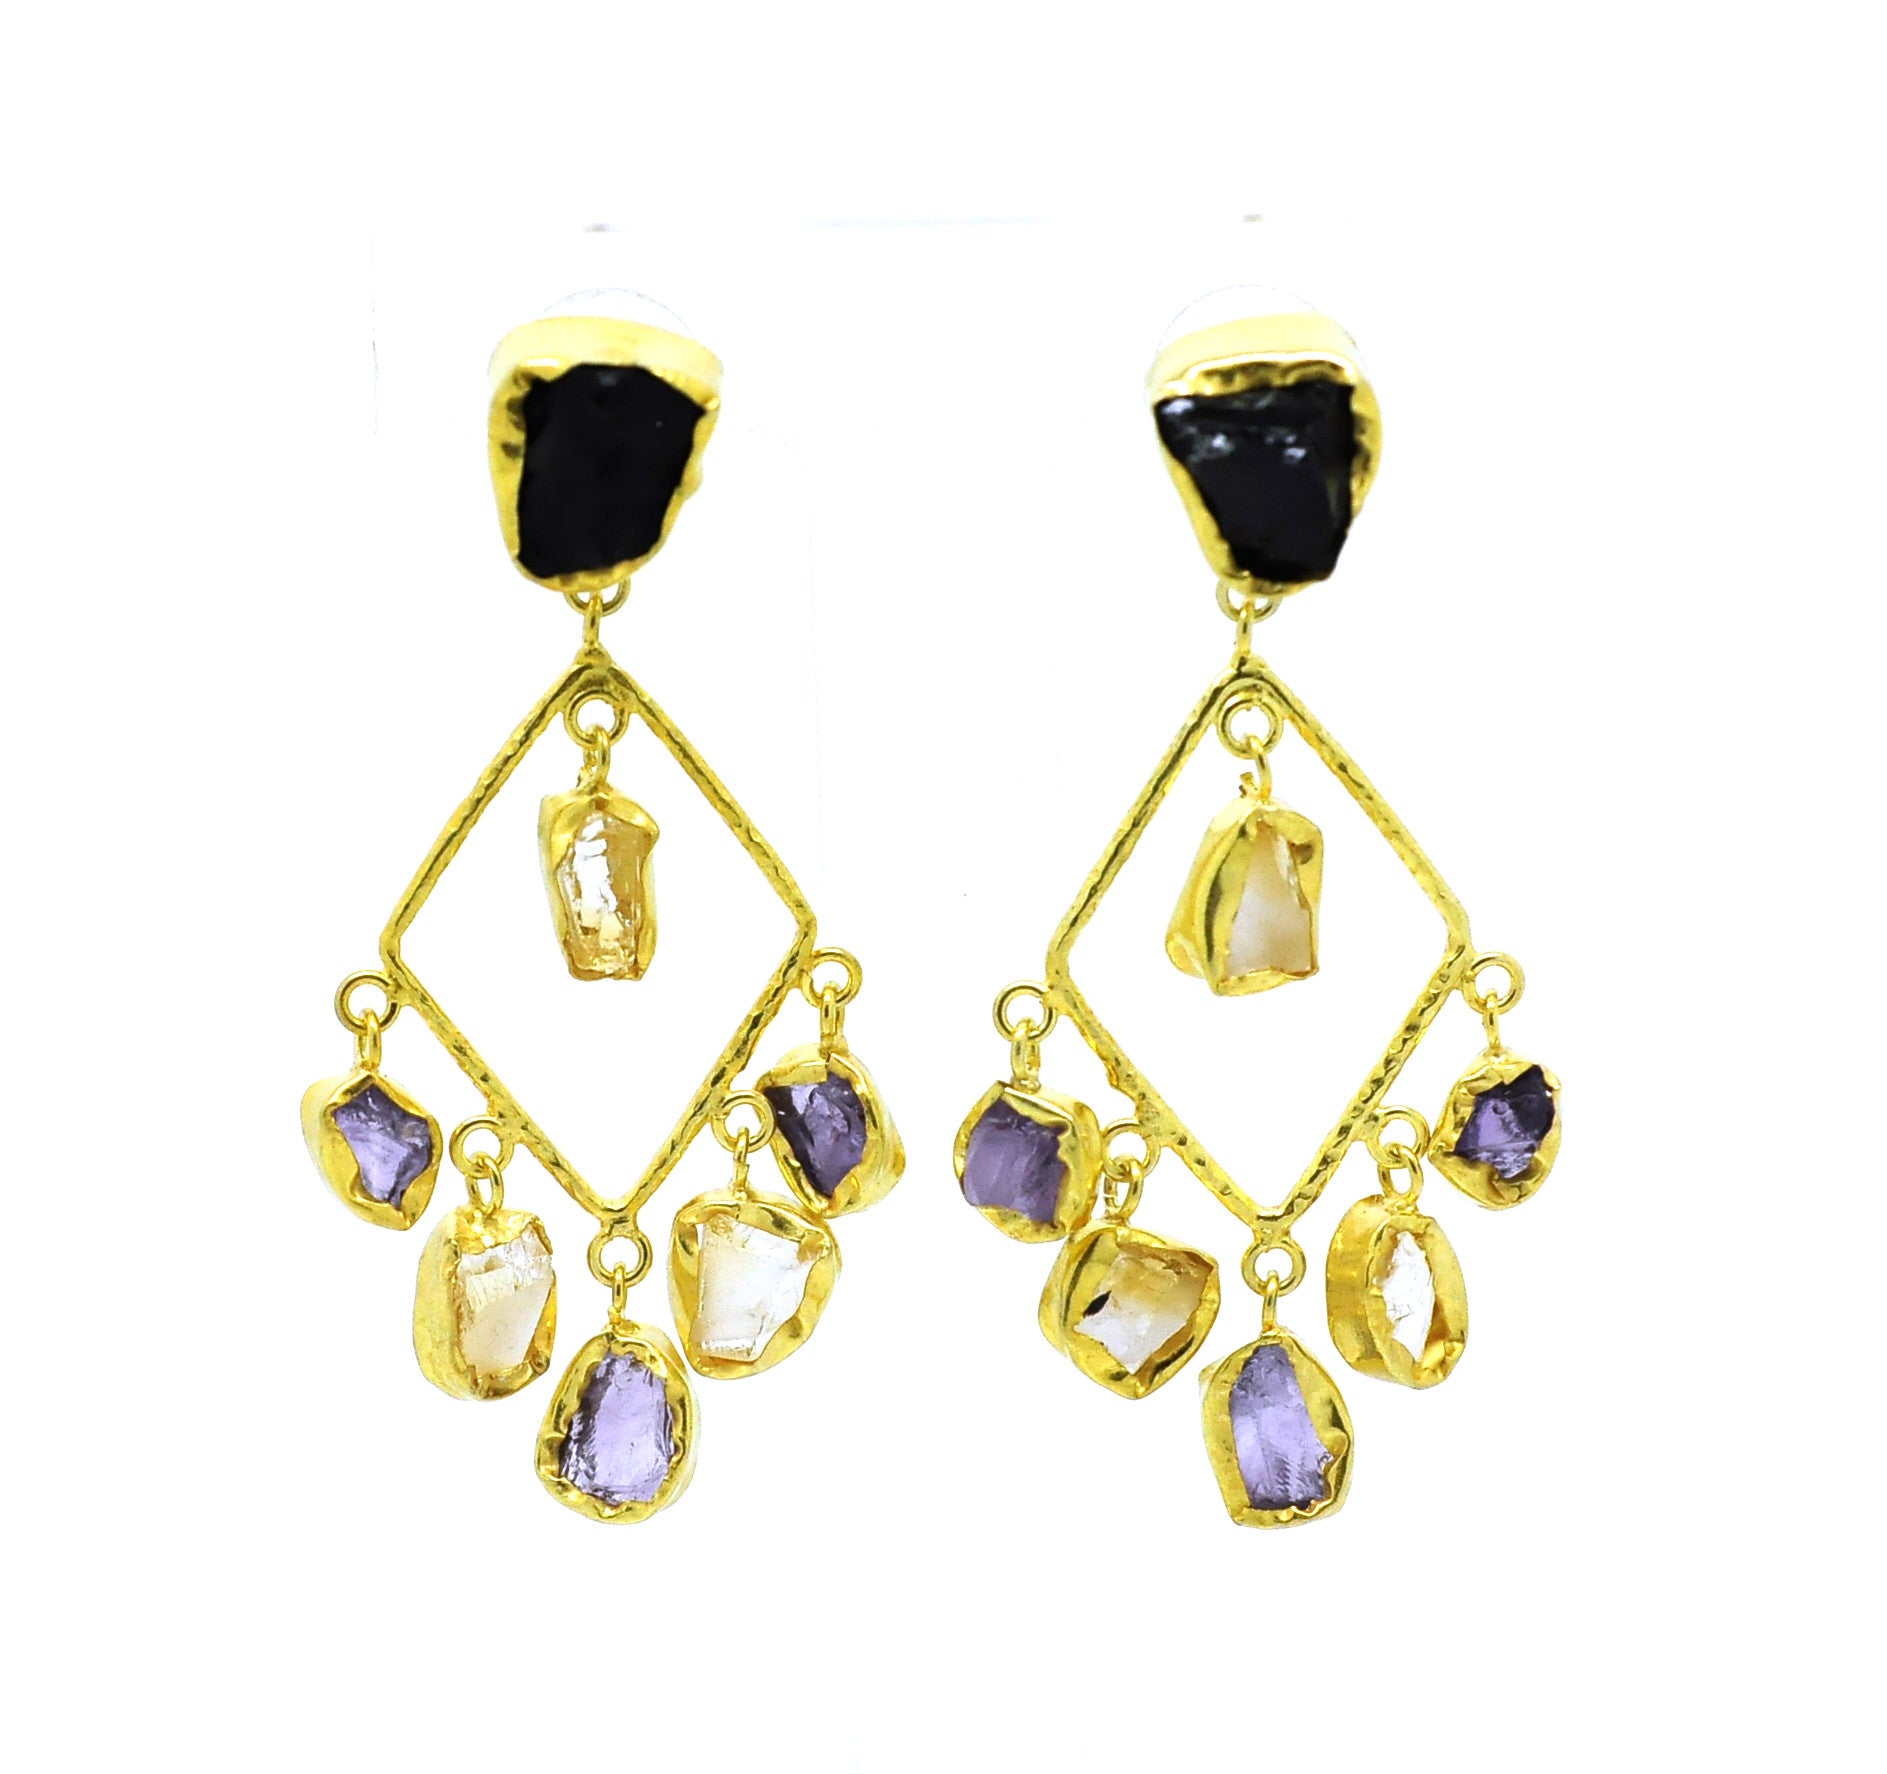 SOLD - ON SALE Gemstone earring 5 (clearance)